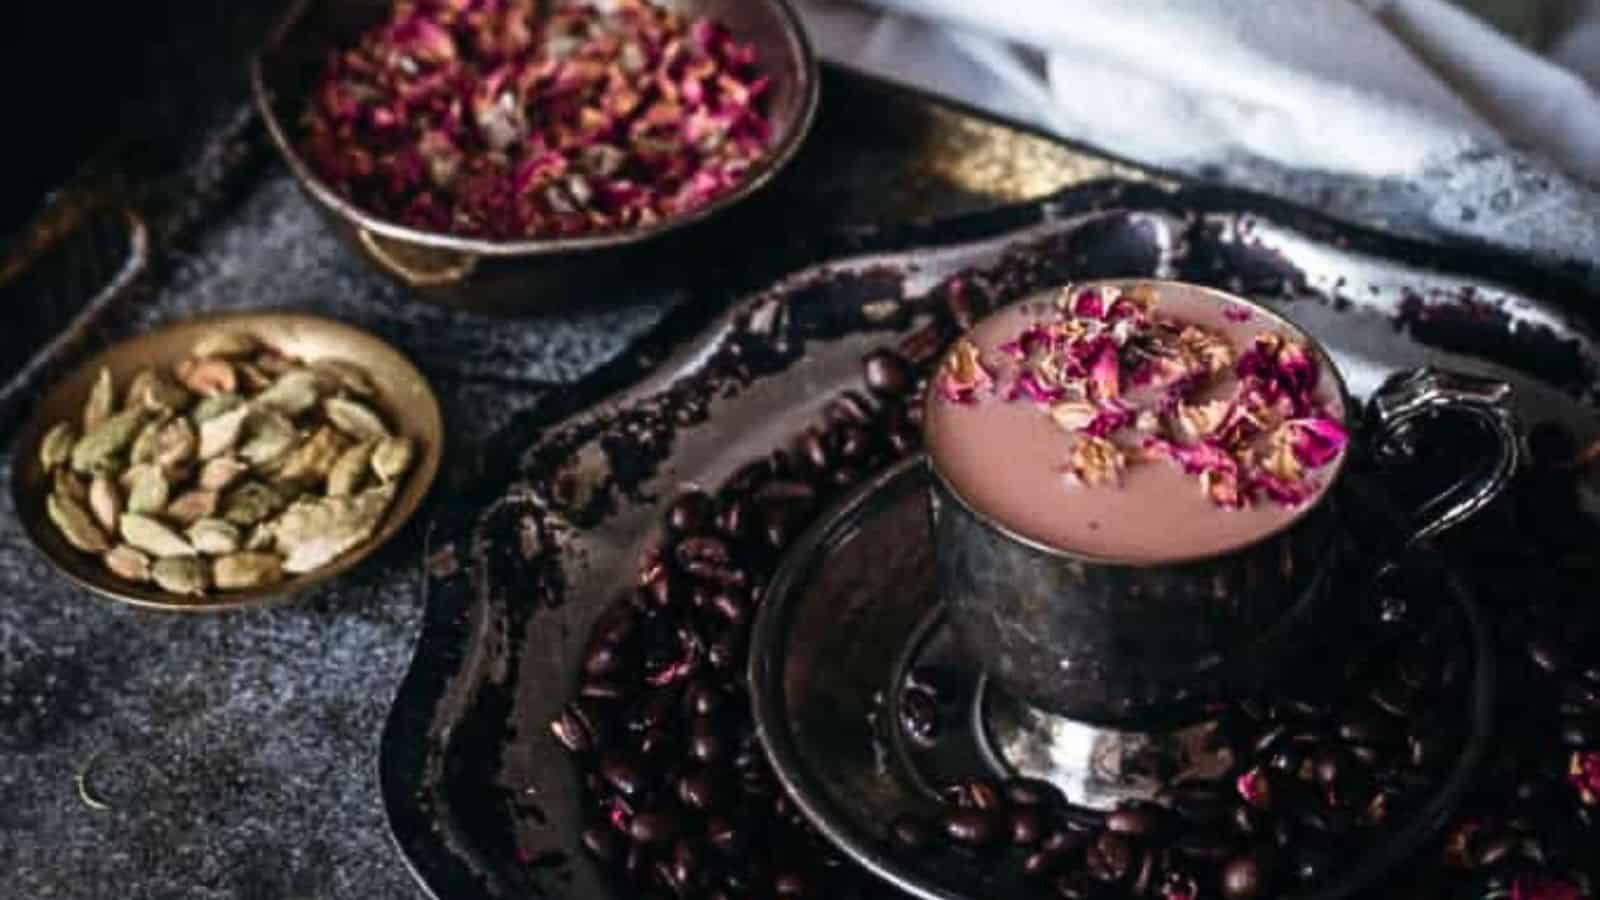 A cup of coffee with rose petals and pistachios.